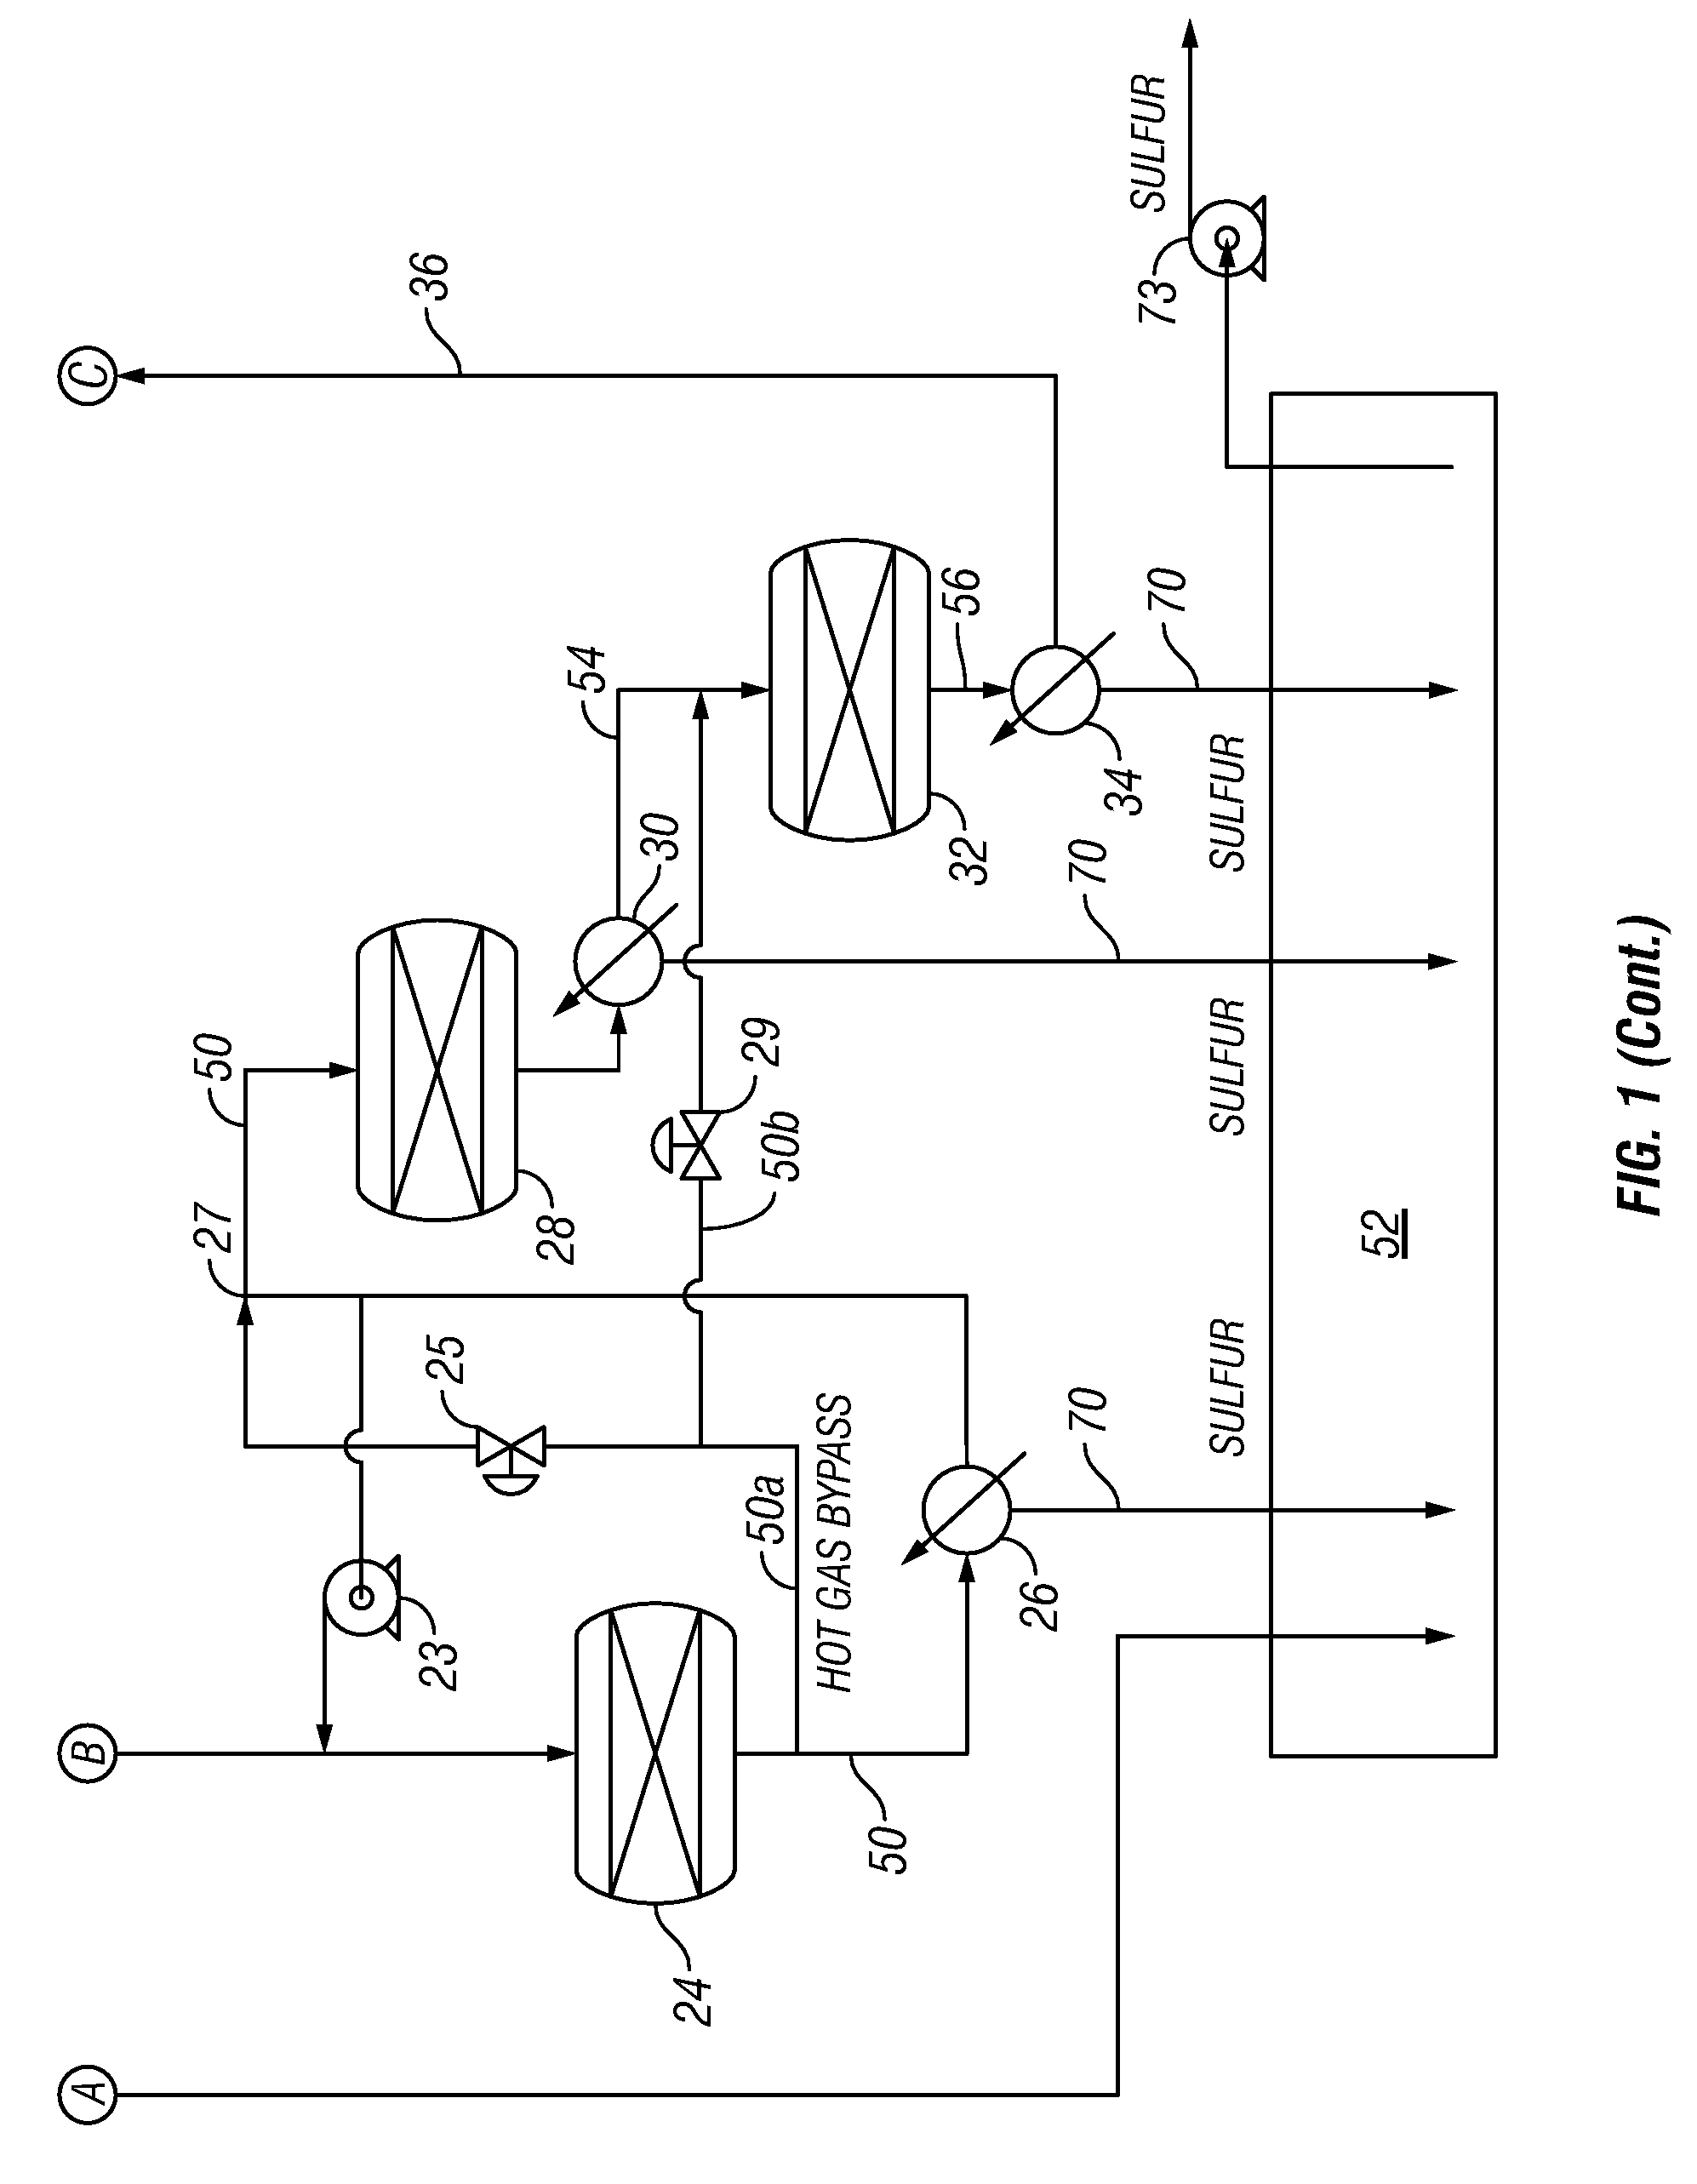 Process for the thermal reduction of sulfur dioxide to sulfur